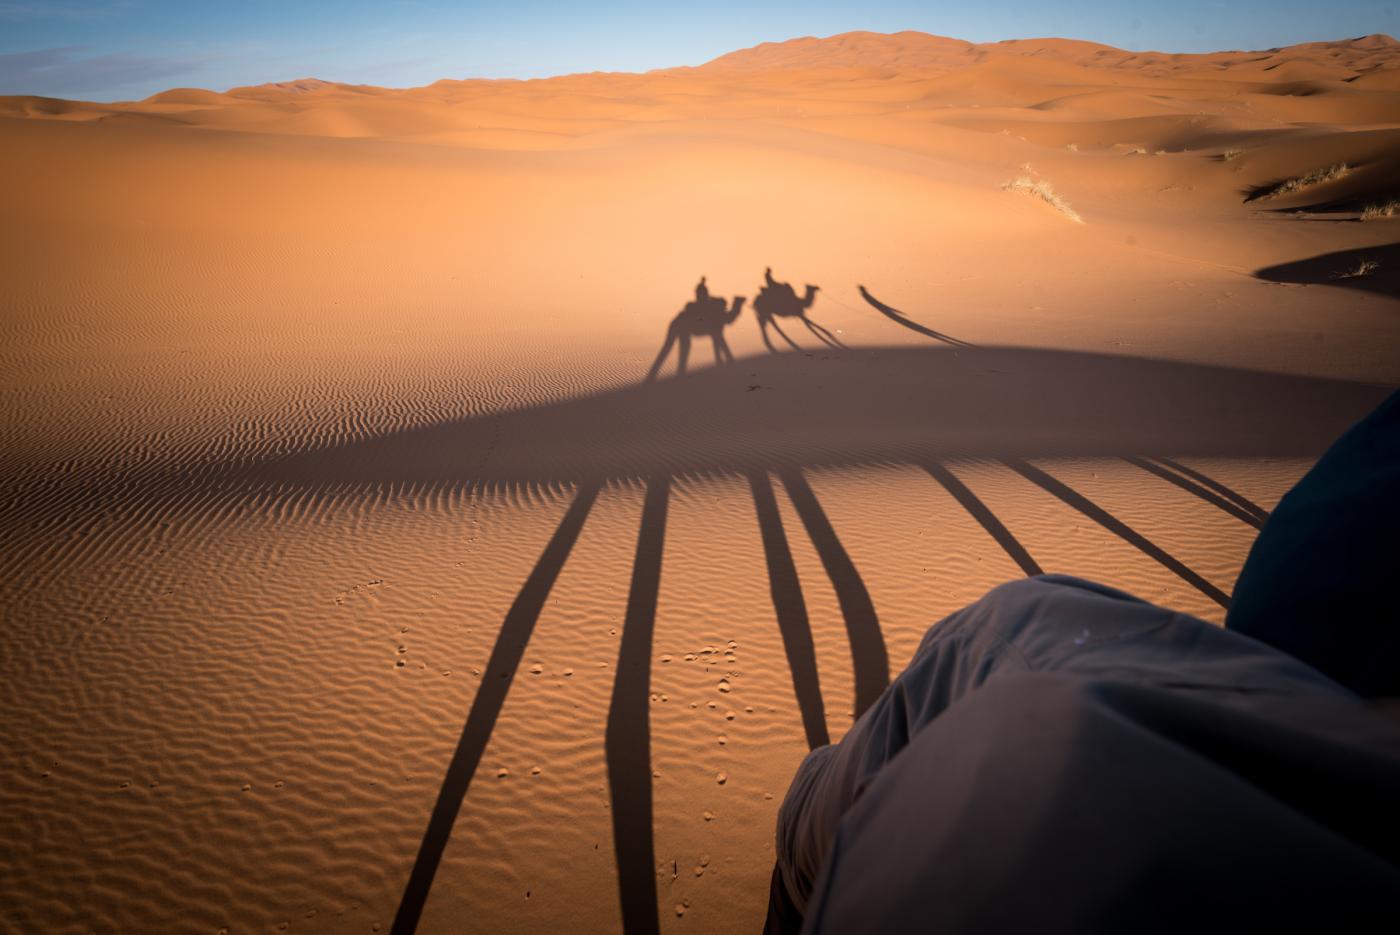 Shadows on camels in the desert sand